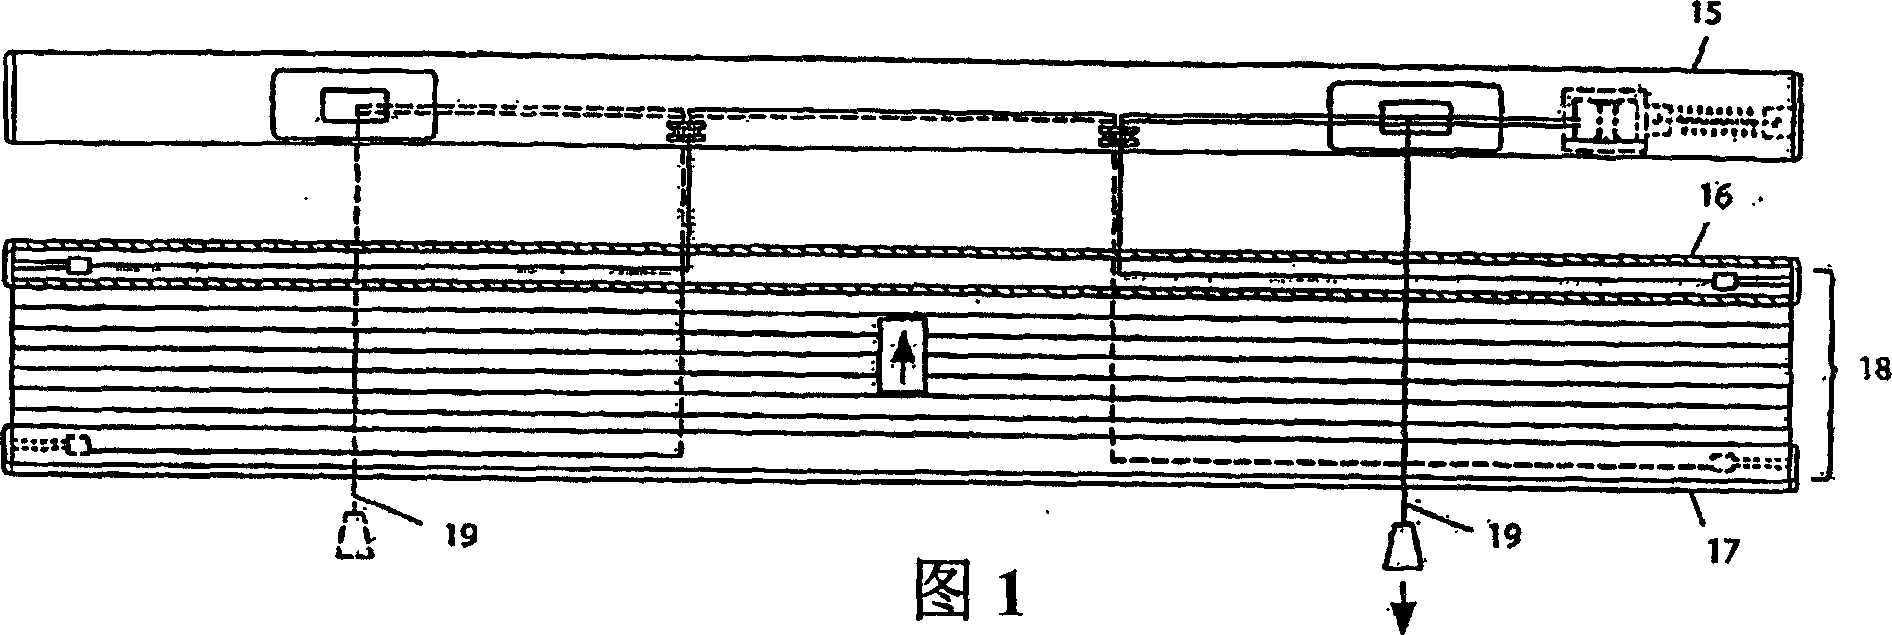 Suspension cord control mechanism for a window covering